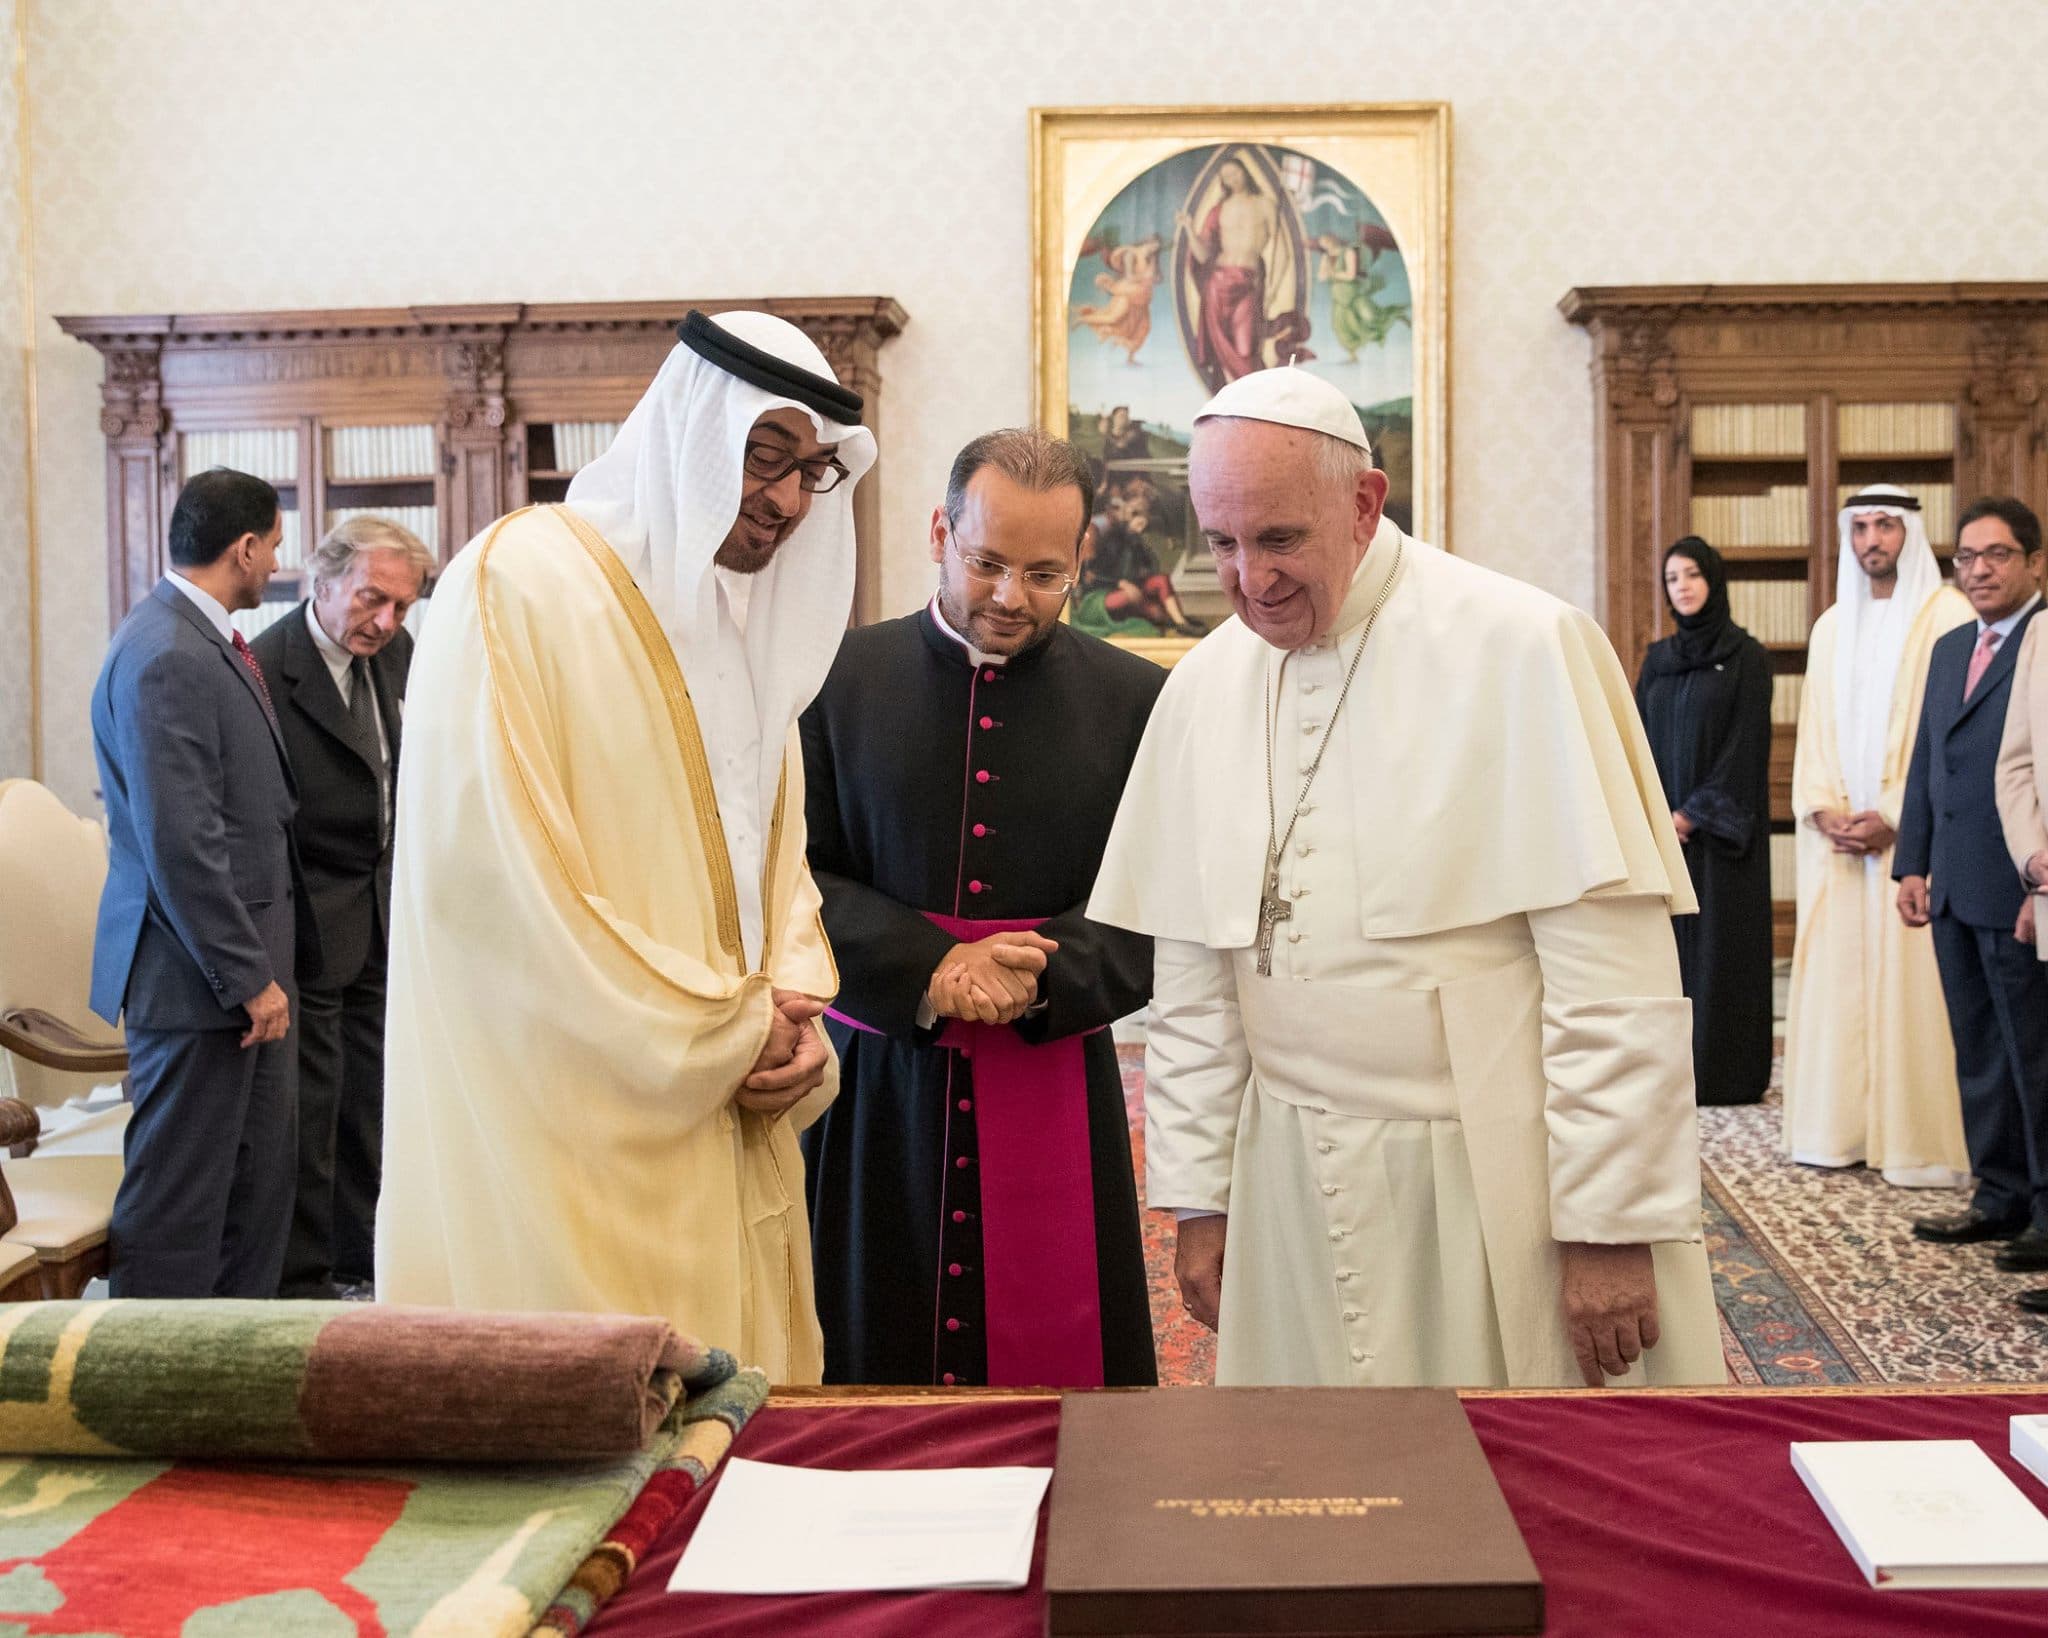 His Highness Sheikh Mohamed bin Zayed Al Nahyan, Crown Prince of Abu Dhabi and Deputy Supreme Commander of the United Arab Emirates Armed Forces meets with Pope Francis at the Vatican, discussing shared goals of tolerance, peace and co-existence.   VATICAN CITY, VATICAN - September 15, 2016